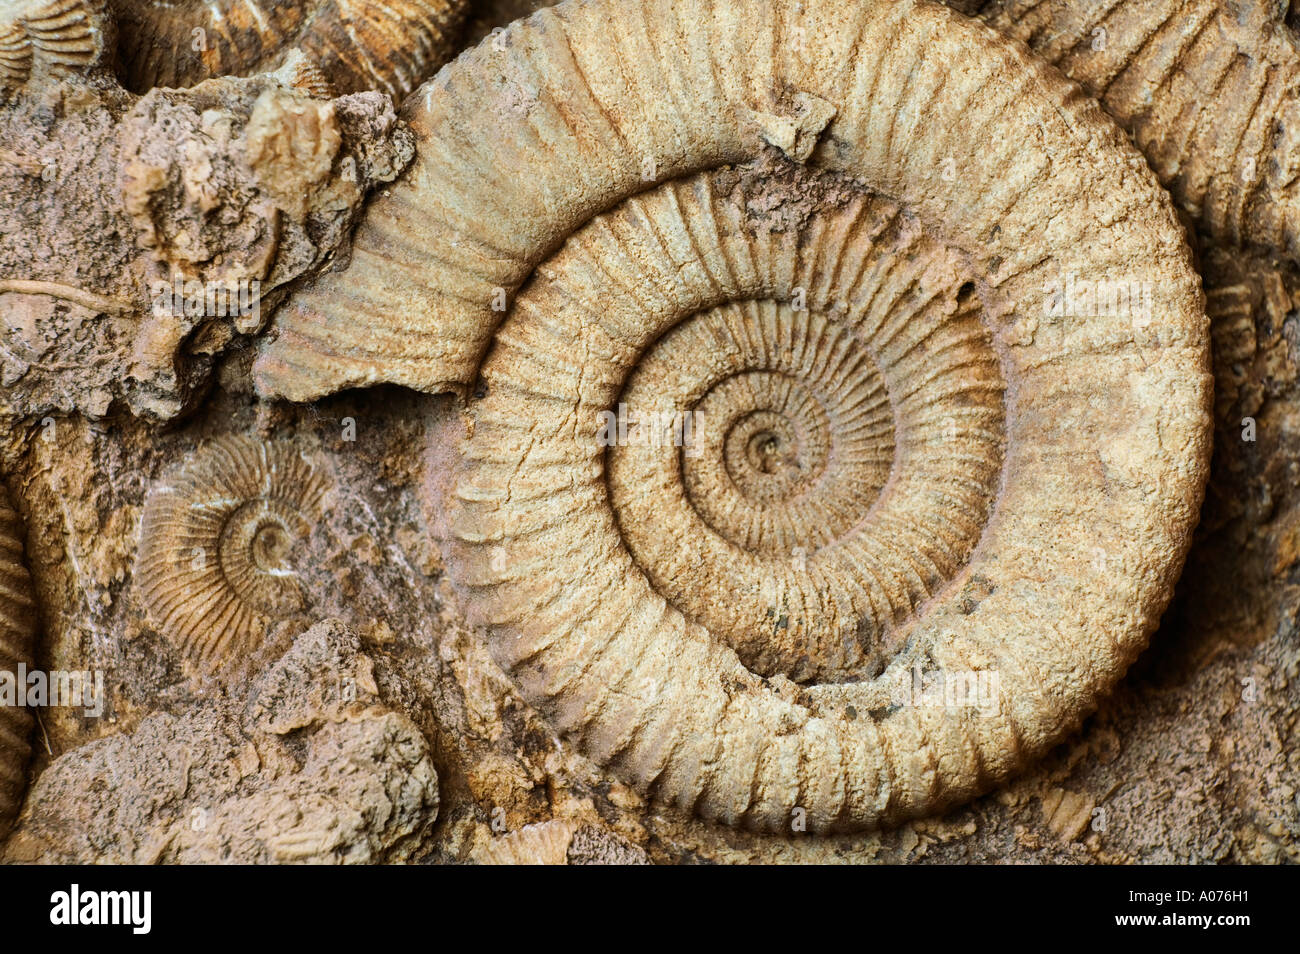 Fossil of snail Stock Photo